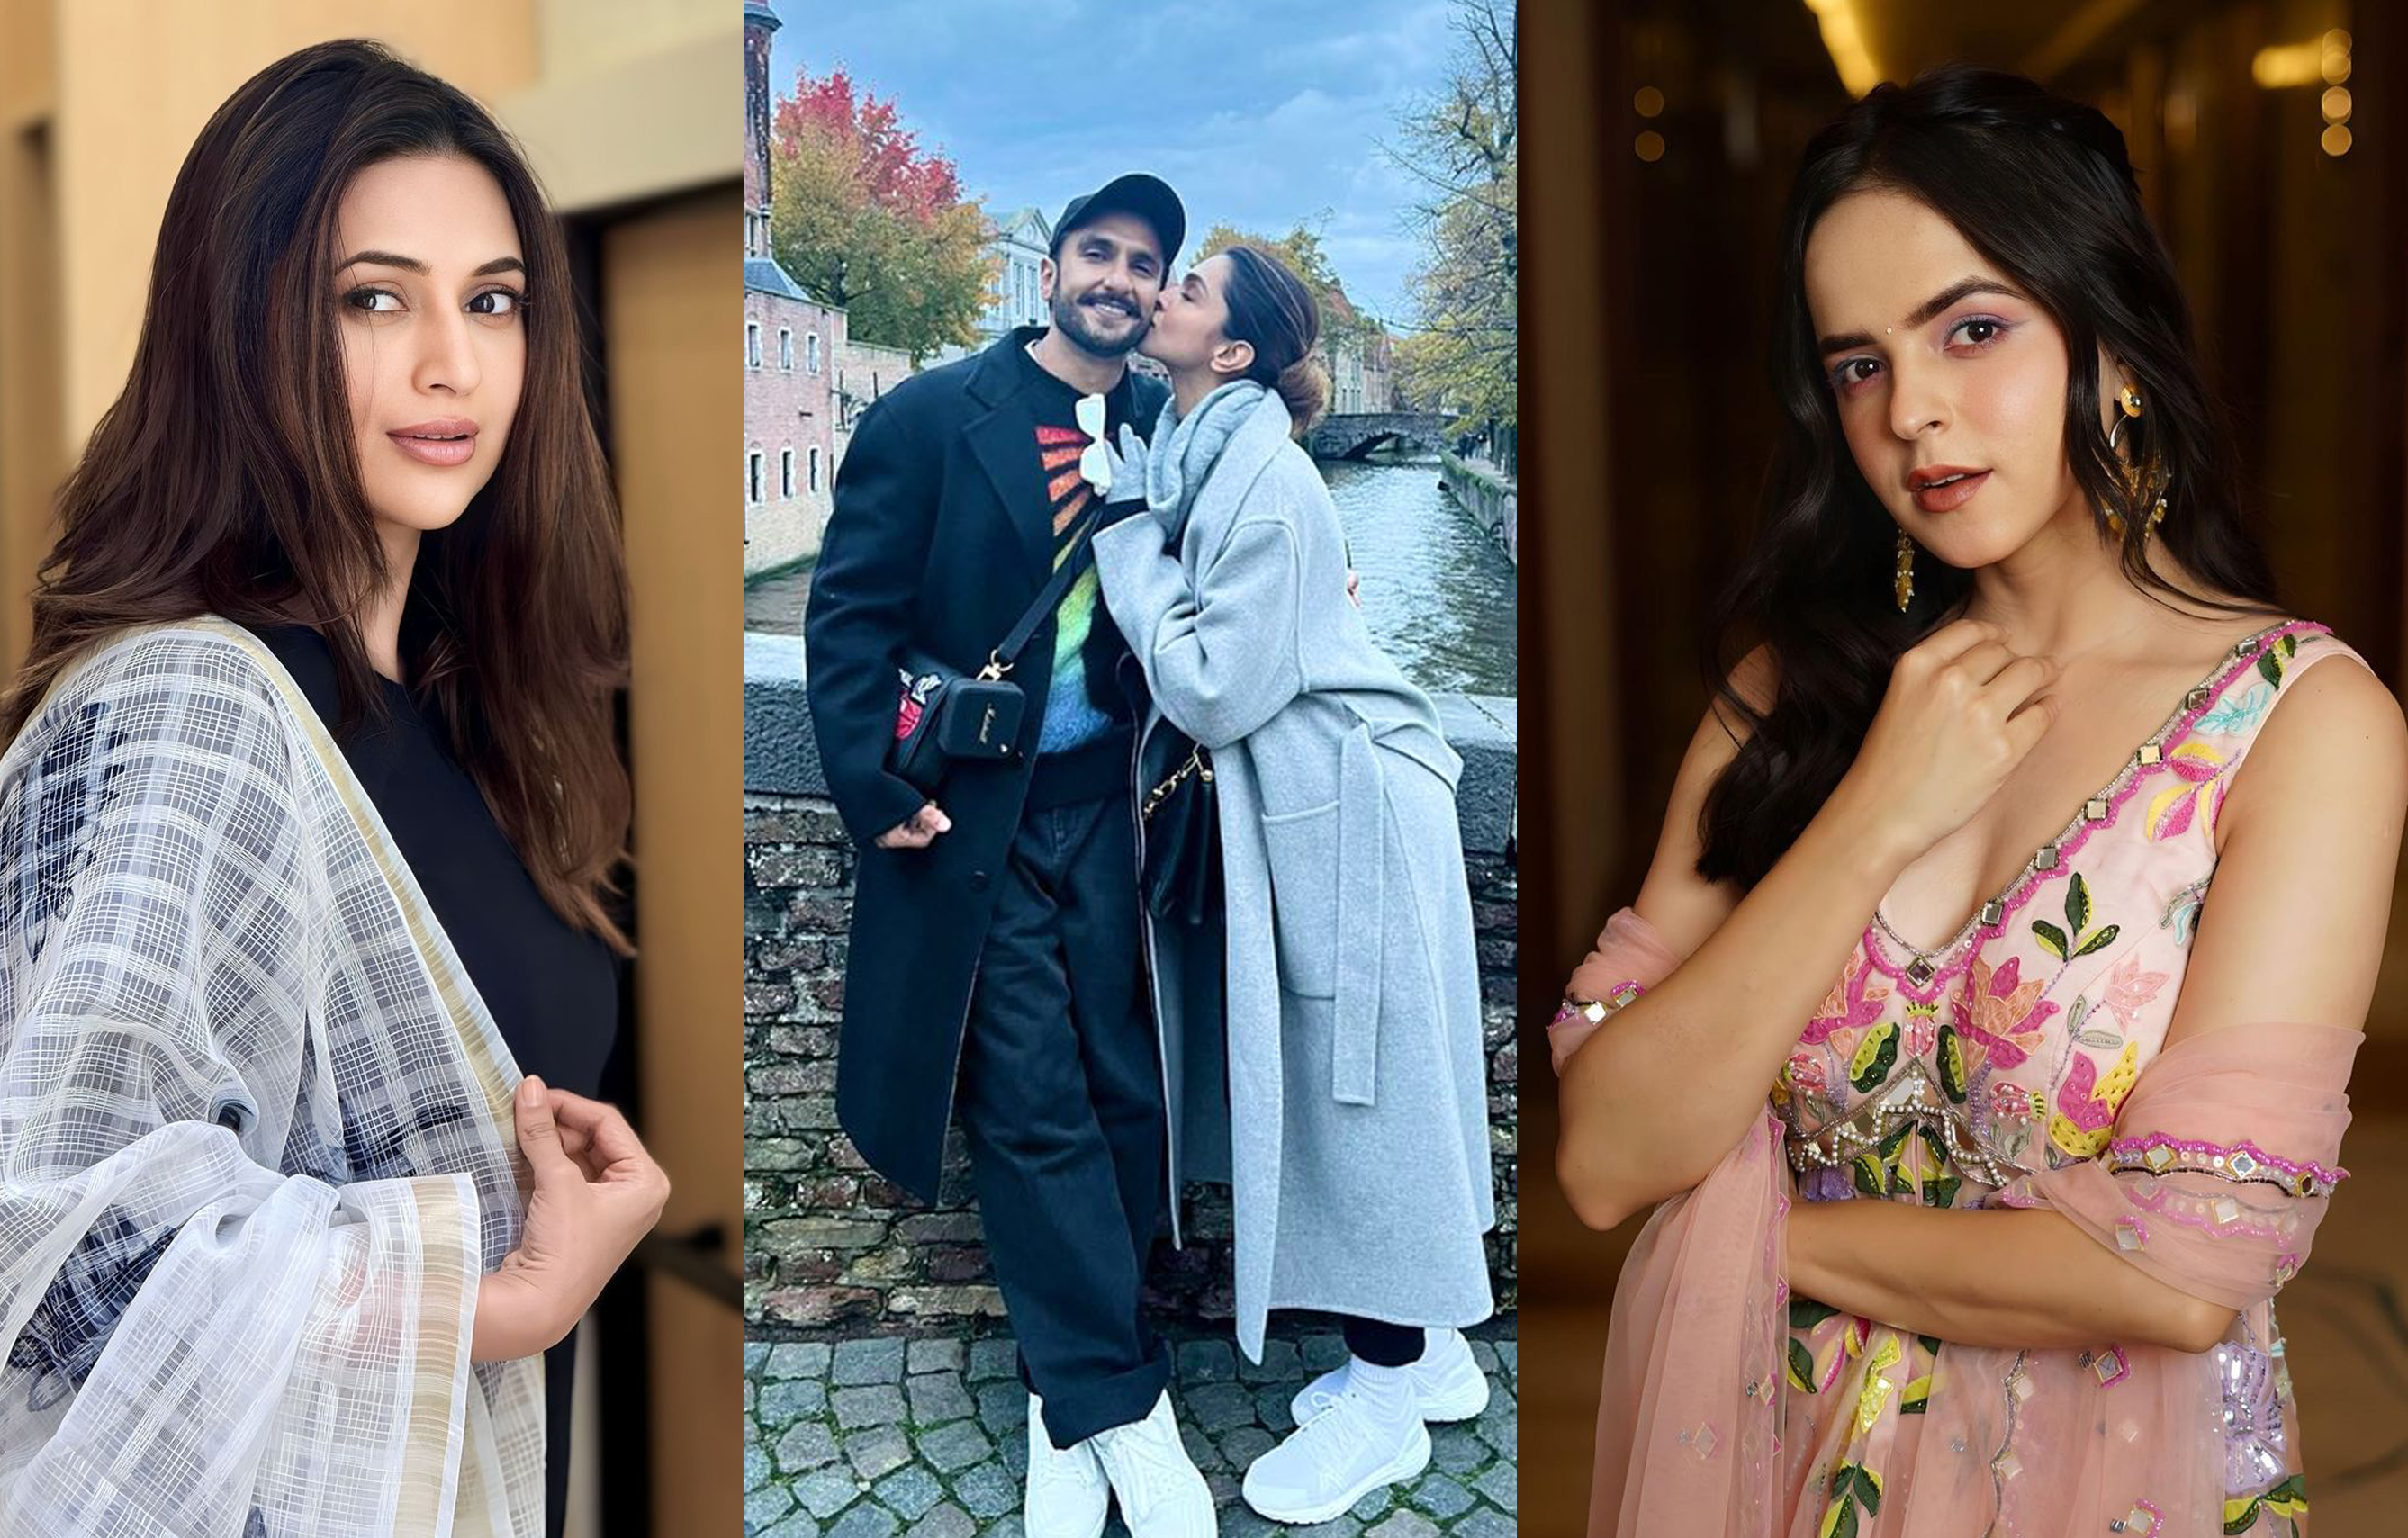 Divyanka Tripathi, Palak Sindhwani And Others Congratulated Bollywood Celebrated Couple Deepika Padukone And Ranveer Singh. What Good News They Revealed Today!